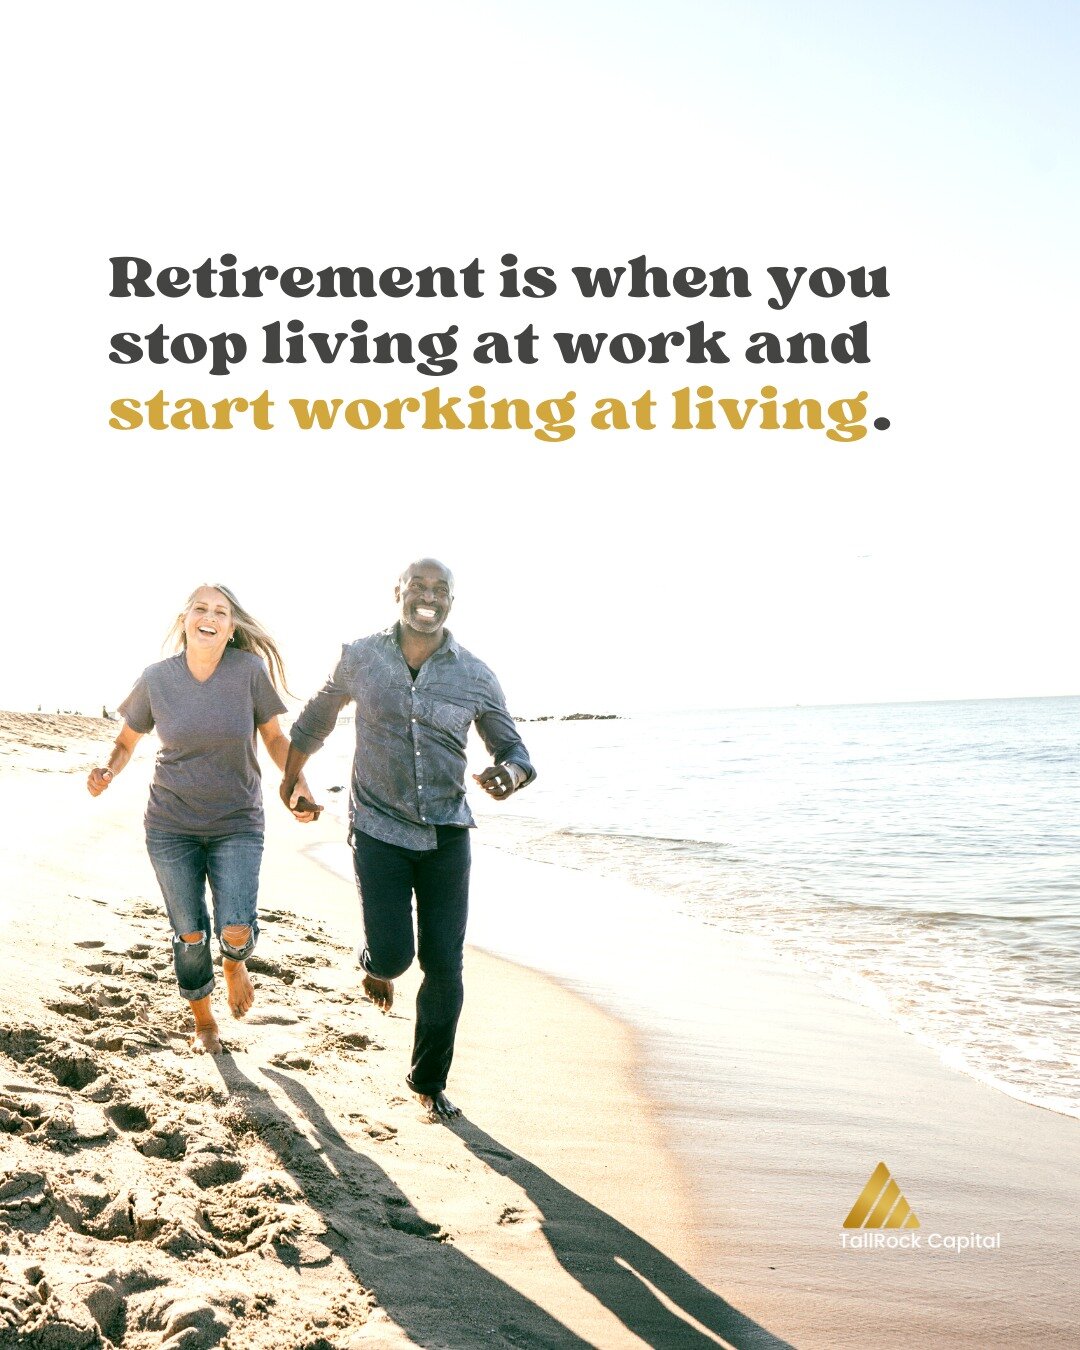 As the year winds down, consider how you're steering your course towards retirement.

With strategic planning, especially in an expat hub like Singapore, you can look forward to retirement as a time of fulfillment and joy.

Connect with us for a free